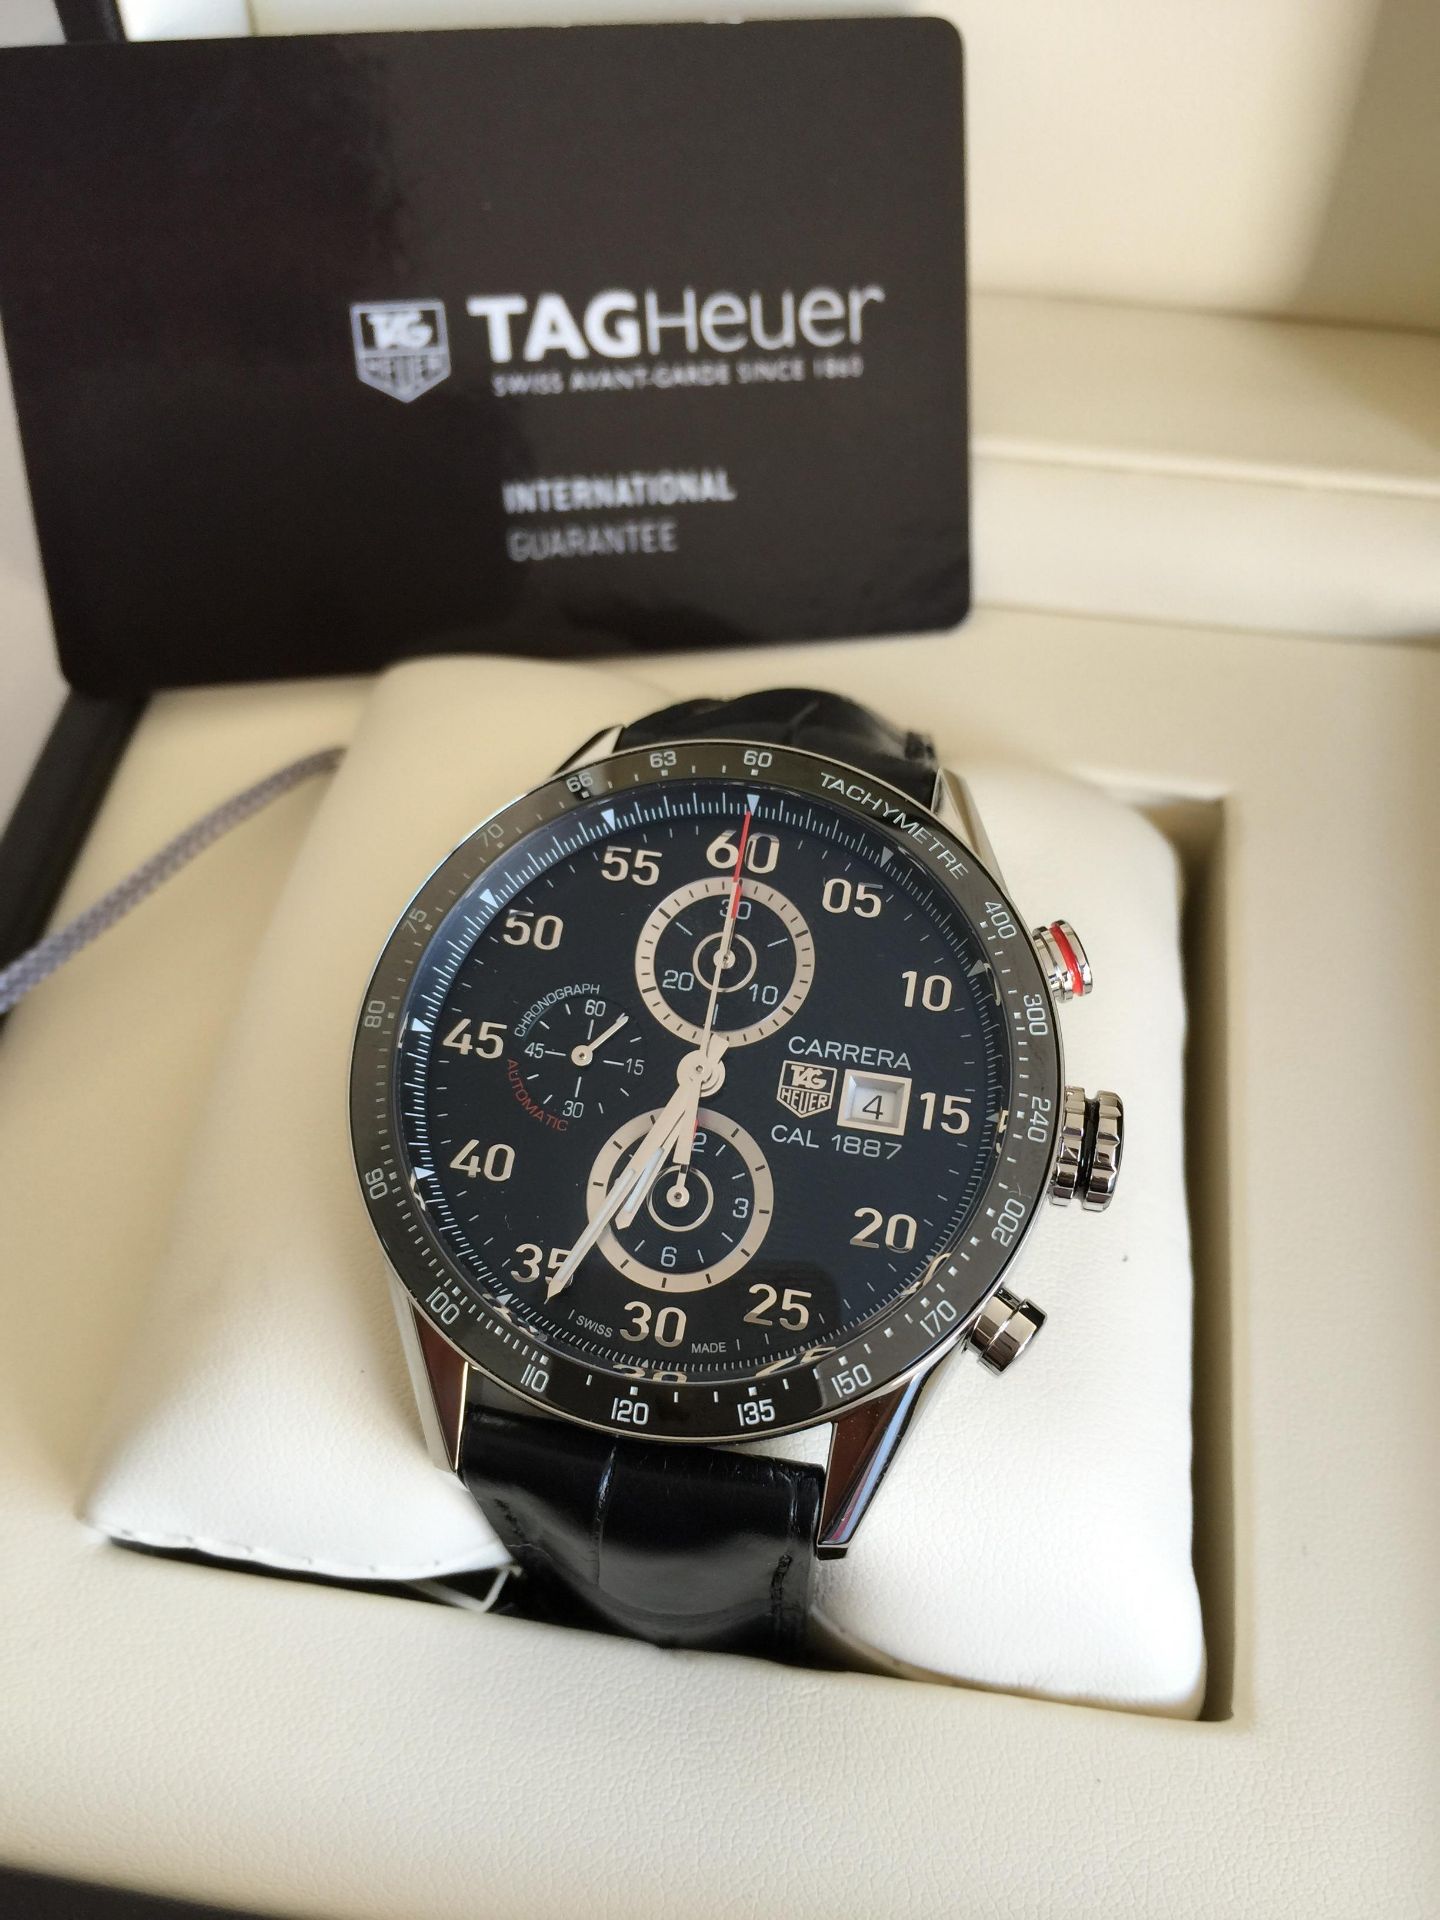 BRAND NEW TAG HEUER CARRERA CAL 1887 LEATHER STRAP